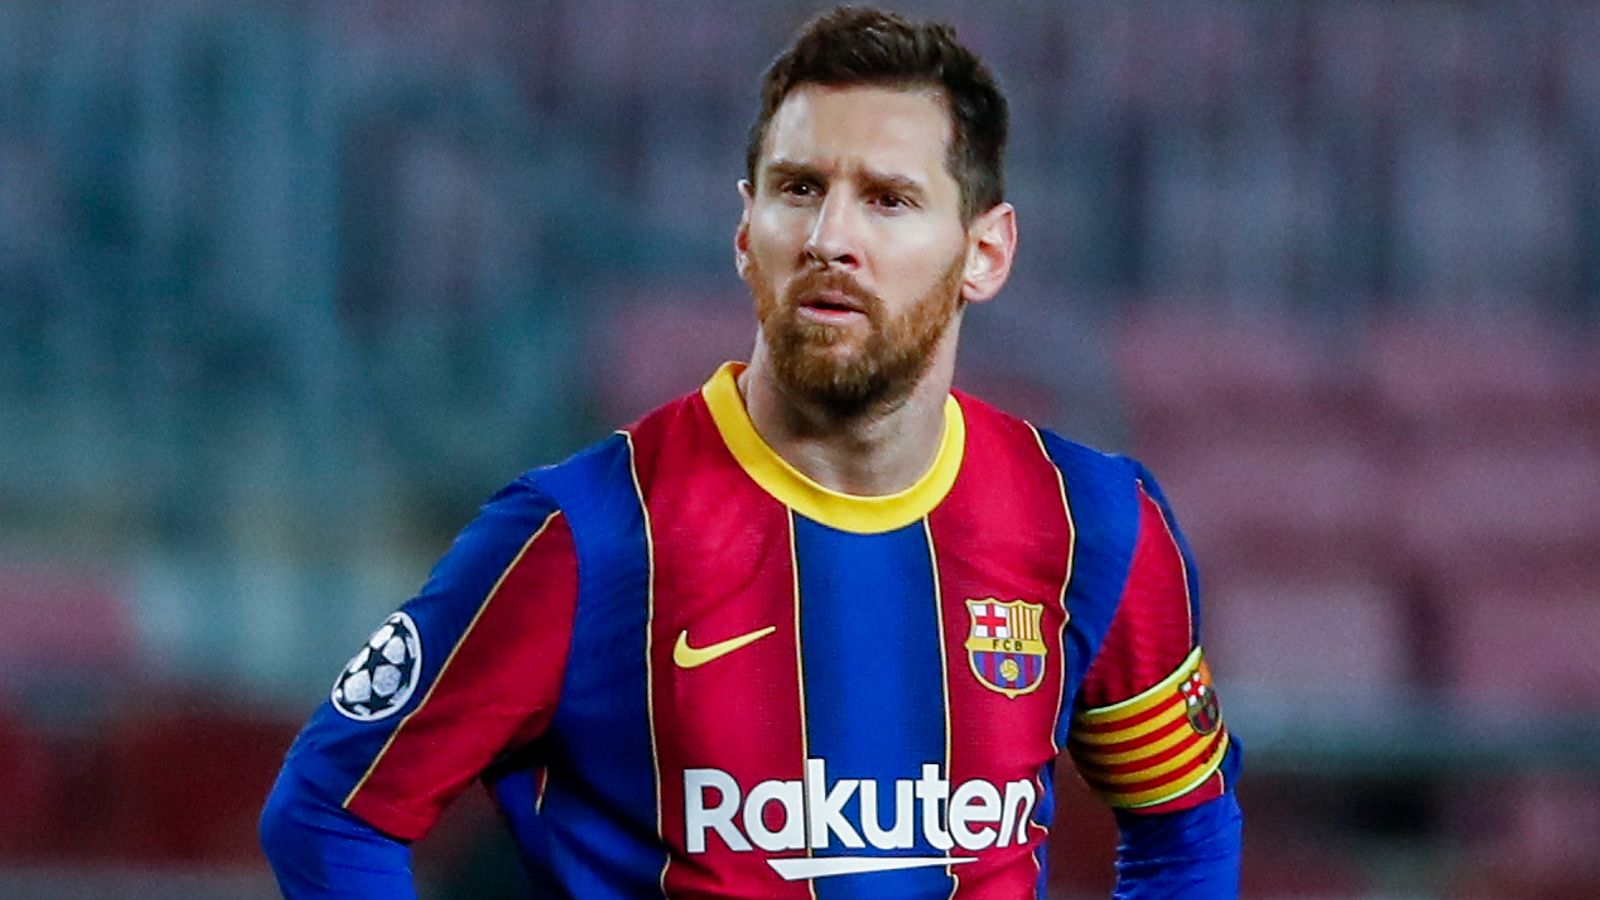 Lionel Messi in advanced transfer talks to join Paris Saint